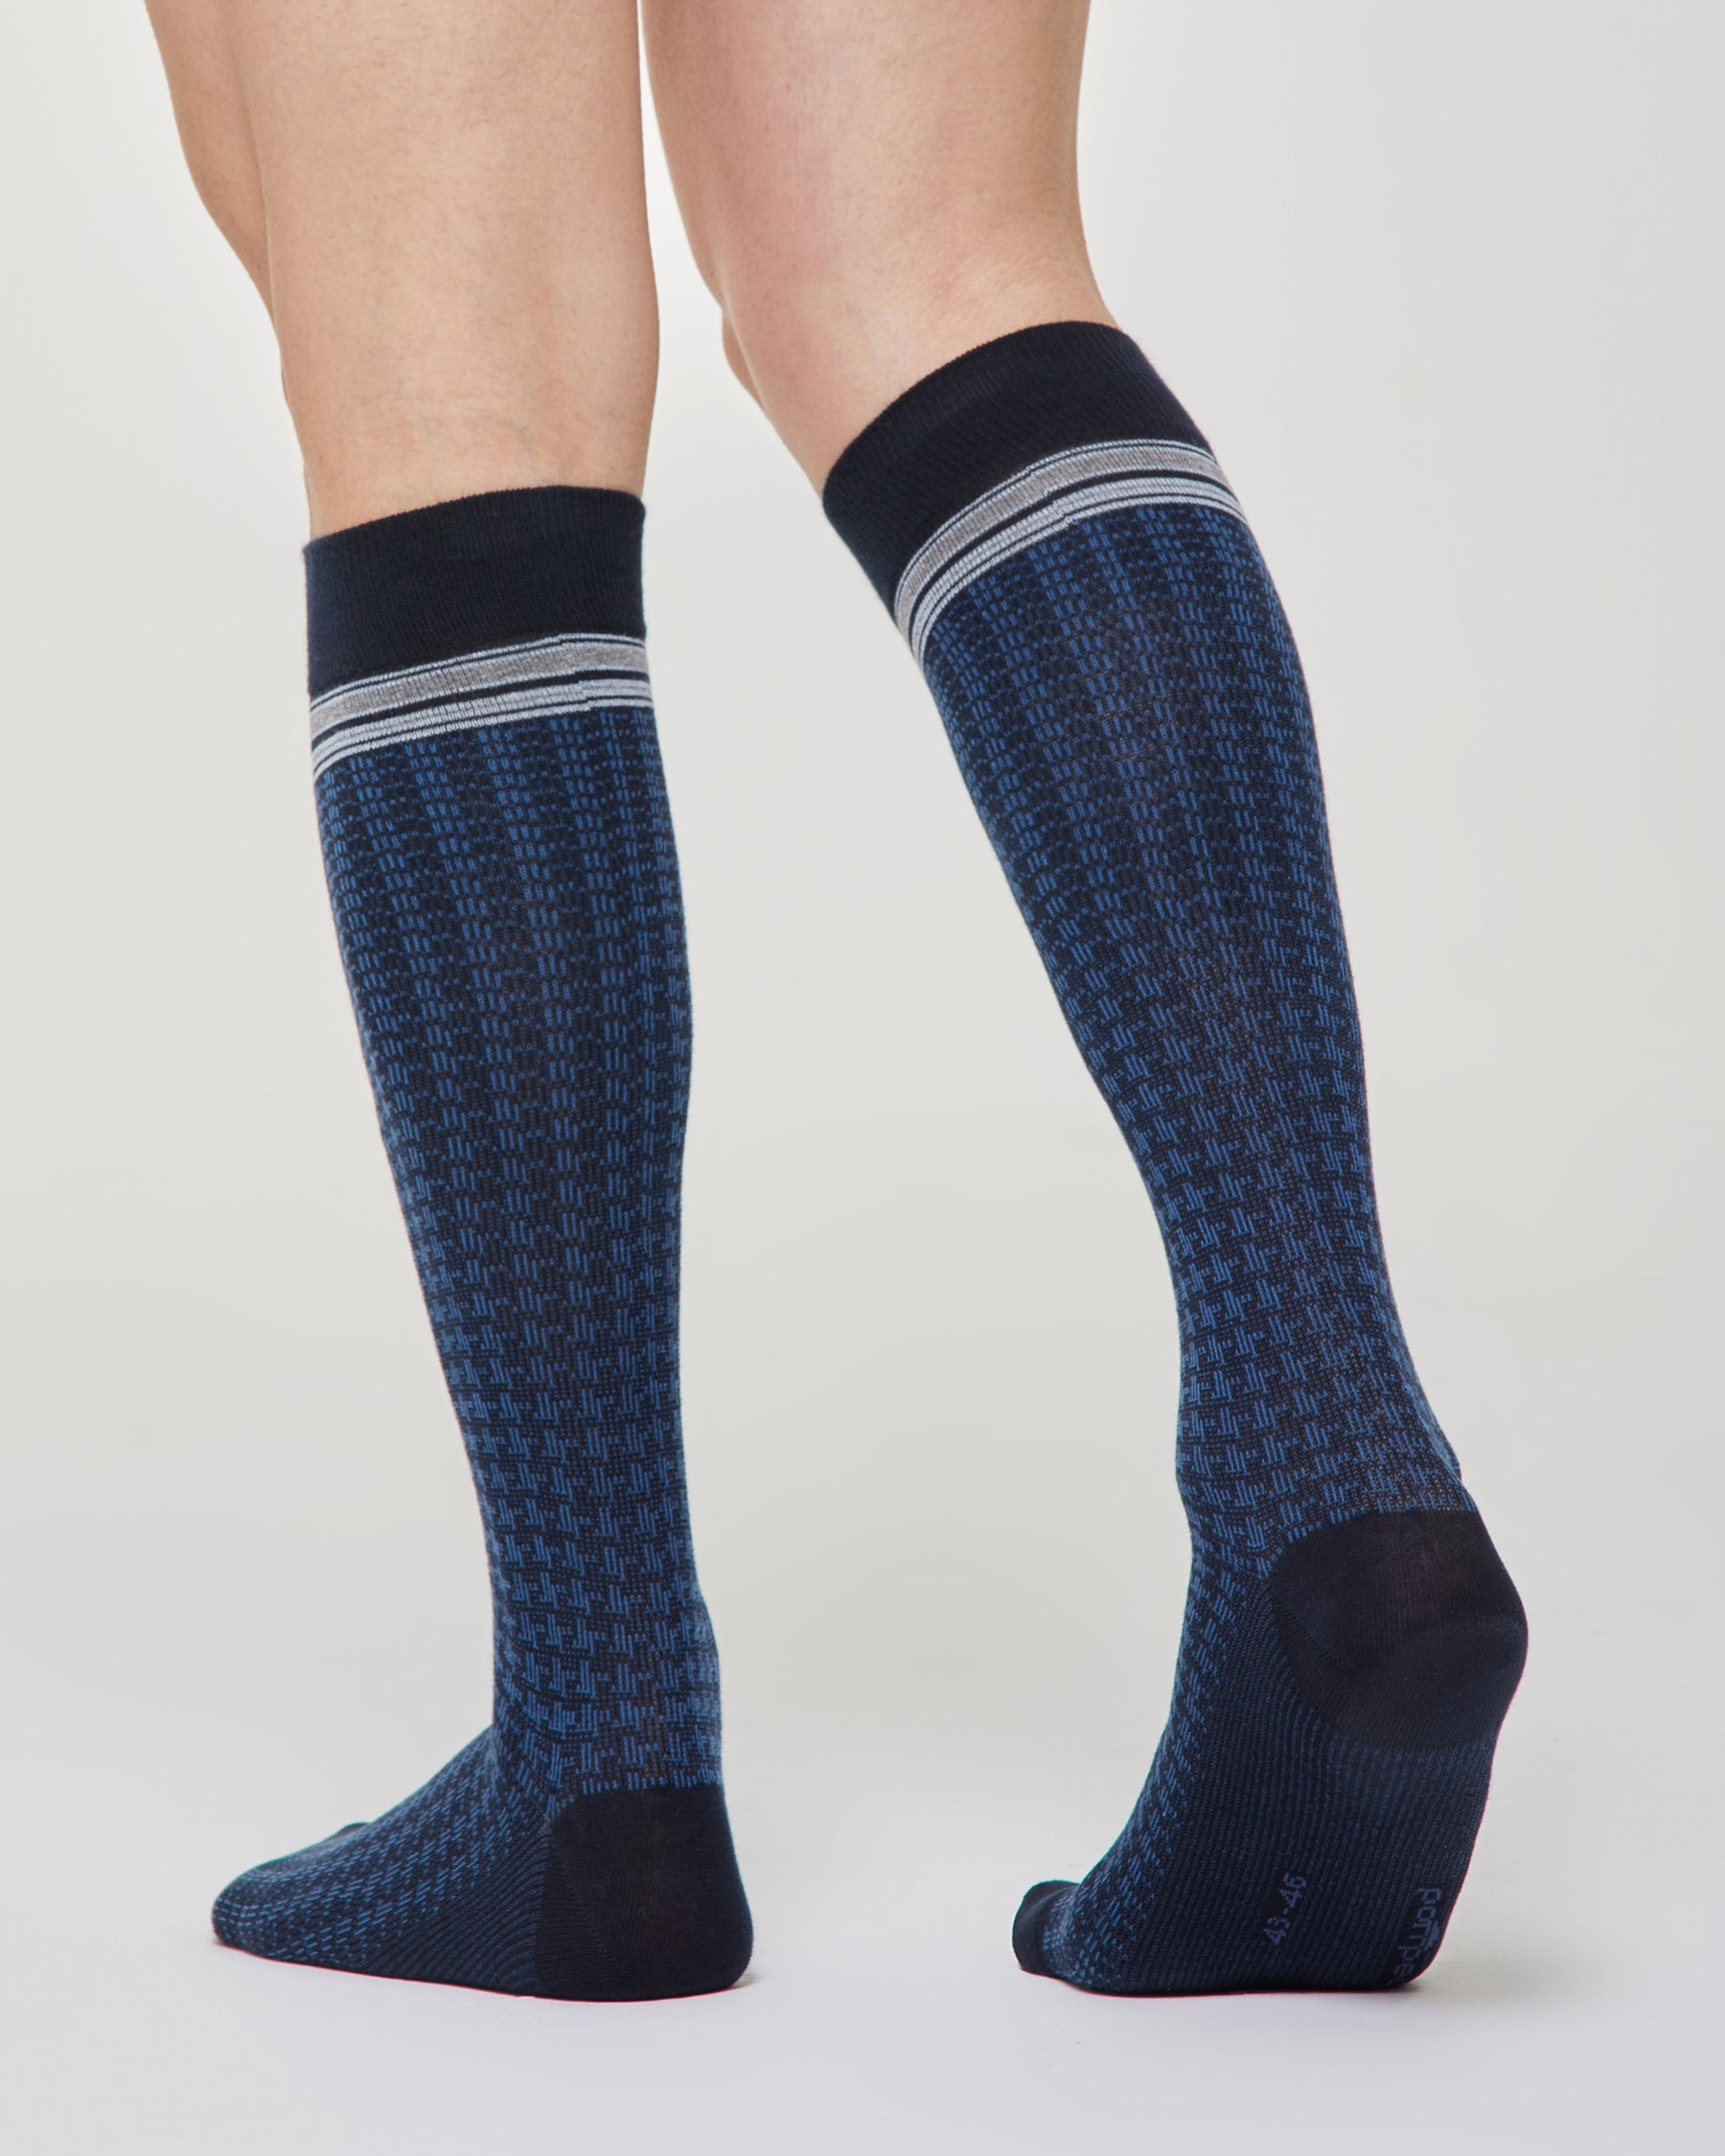 Eugenio cotton long sock with tie pattern